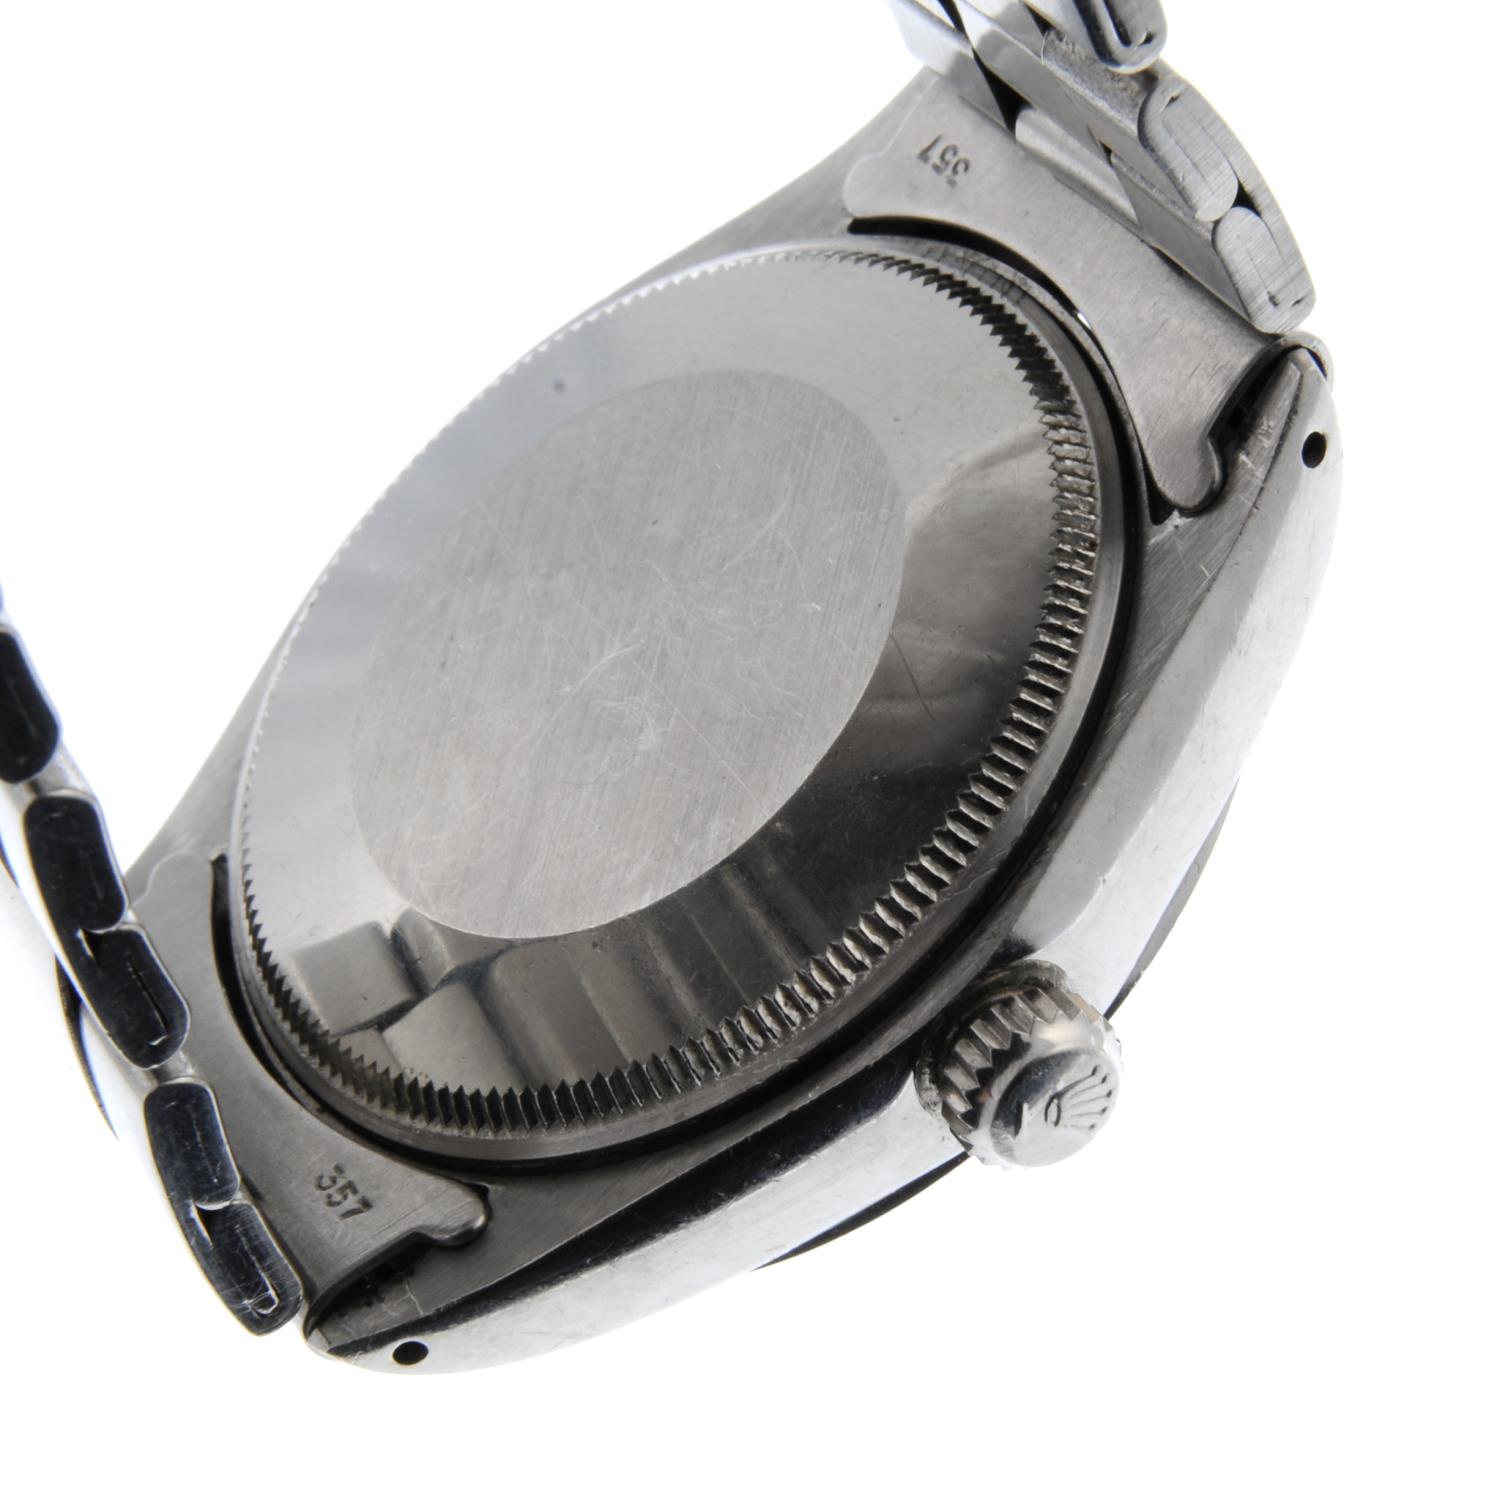 ROLEX - a gentleman's Oyster Perpetual Air-King Precision bracelet watch. - Image 2 of 5